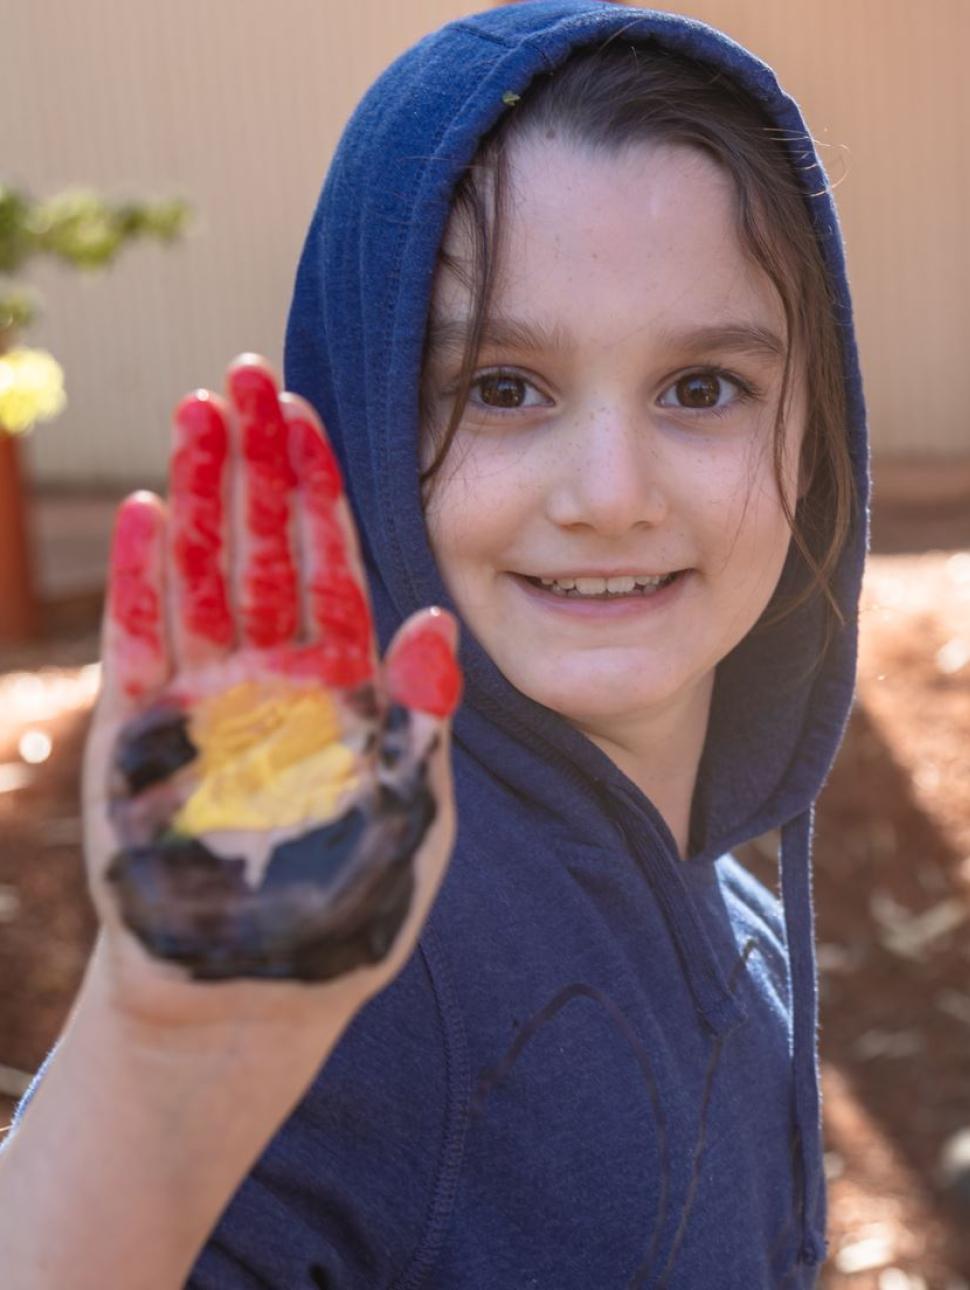 In the photo, a child's hand is held up with their palm facing outward, proudly displaying an Aboriginal flag painted within it. The colorful design symbolizes their connection to Indigenous culture and heritage.